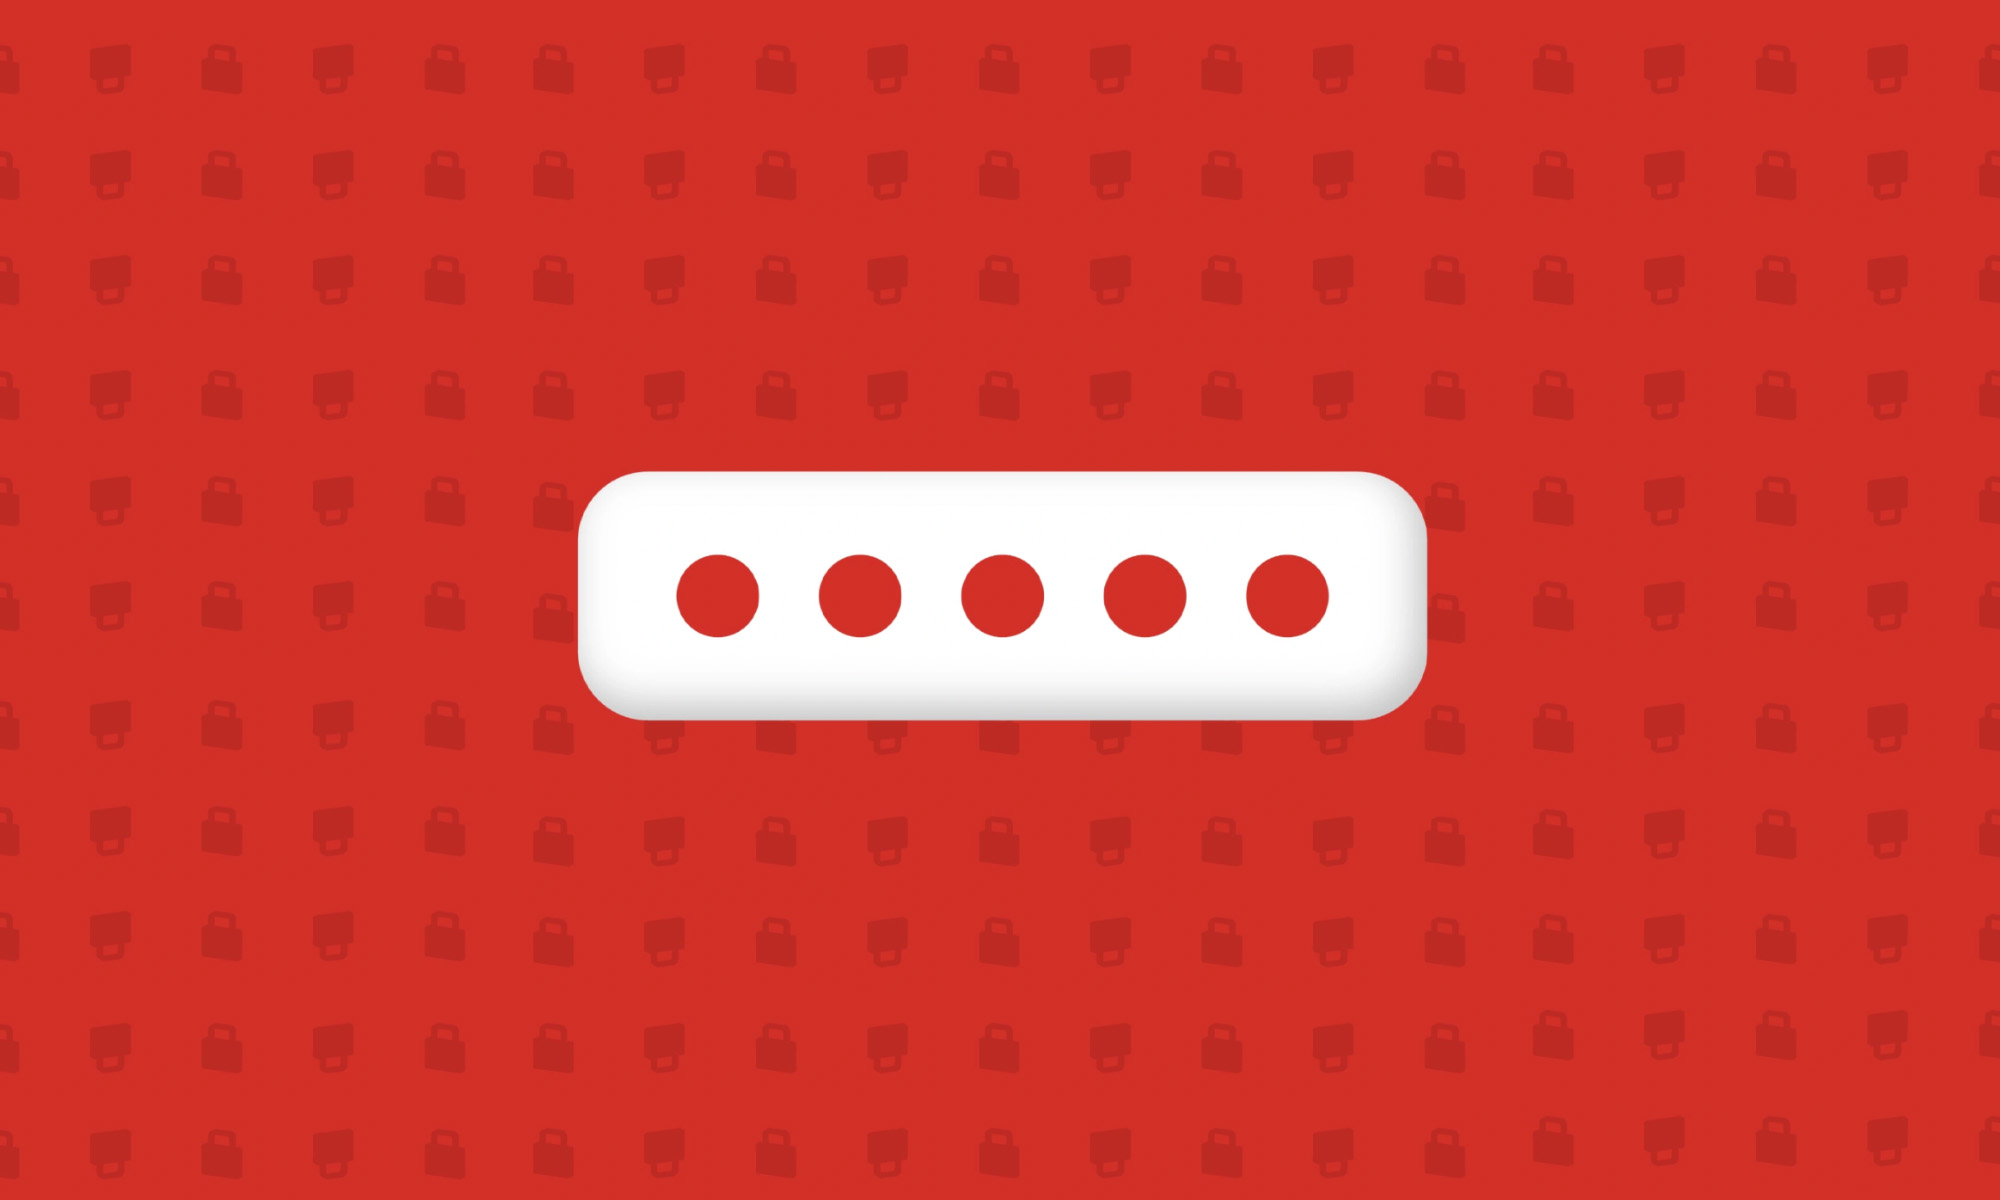 lastpass has revealed yet another security breach